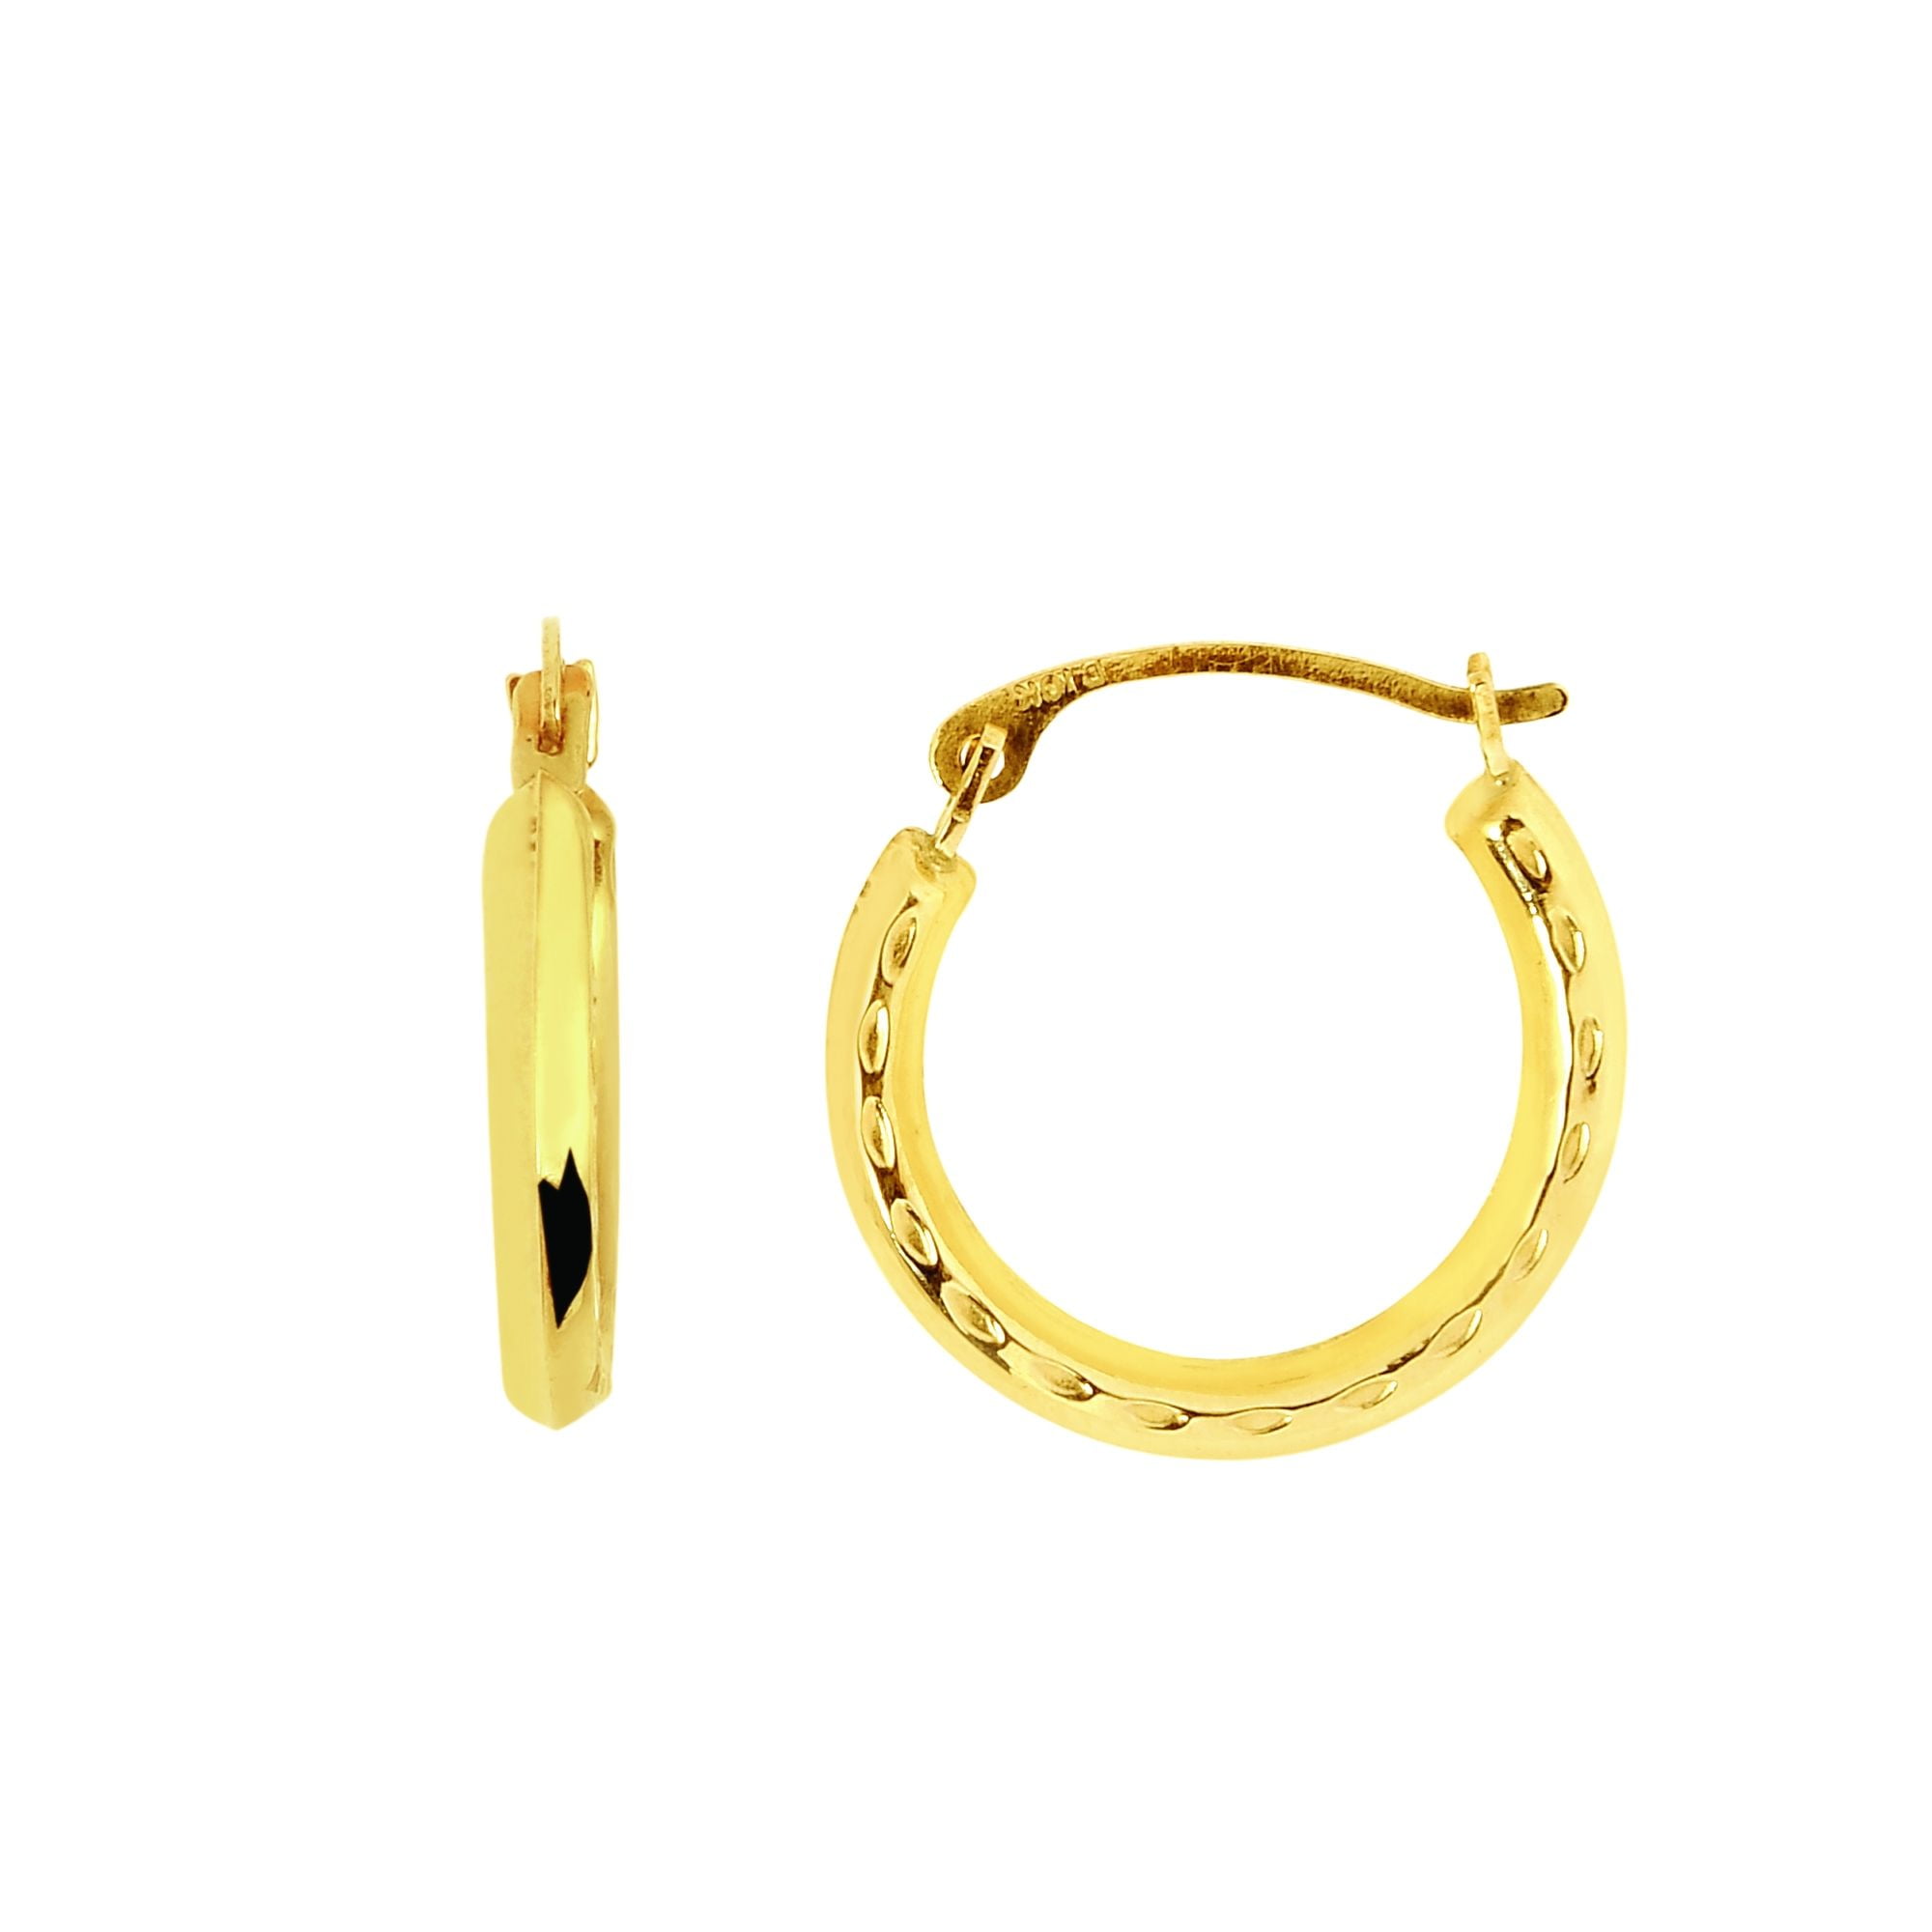 14K Yellow Gold Shiny Textured Round Hoop Earrings with Hinged by IcedTime